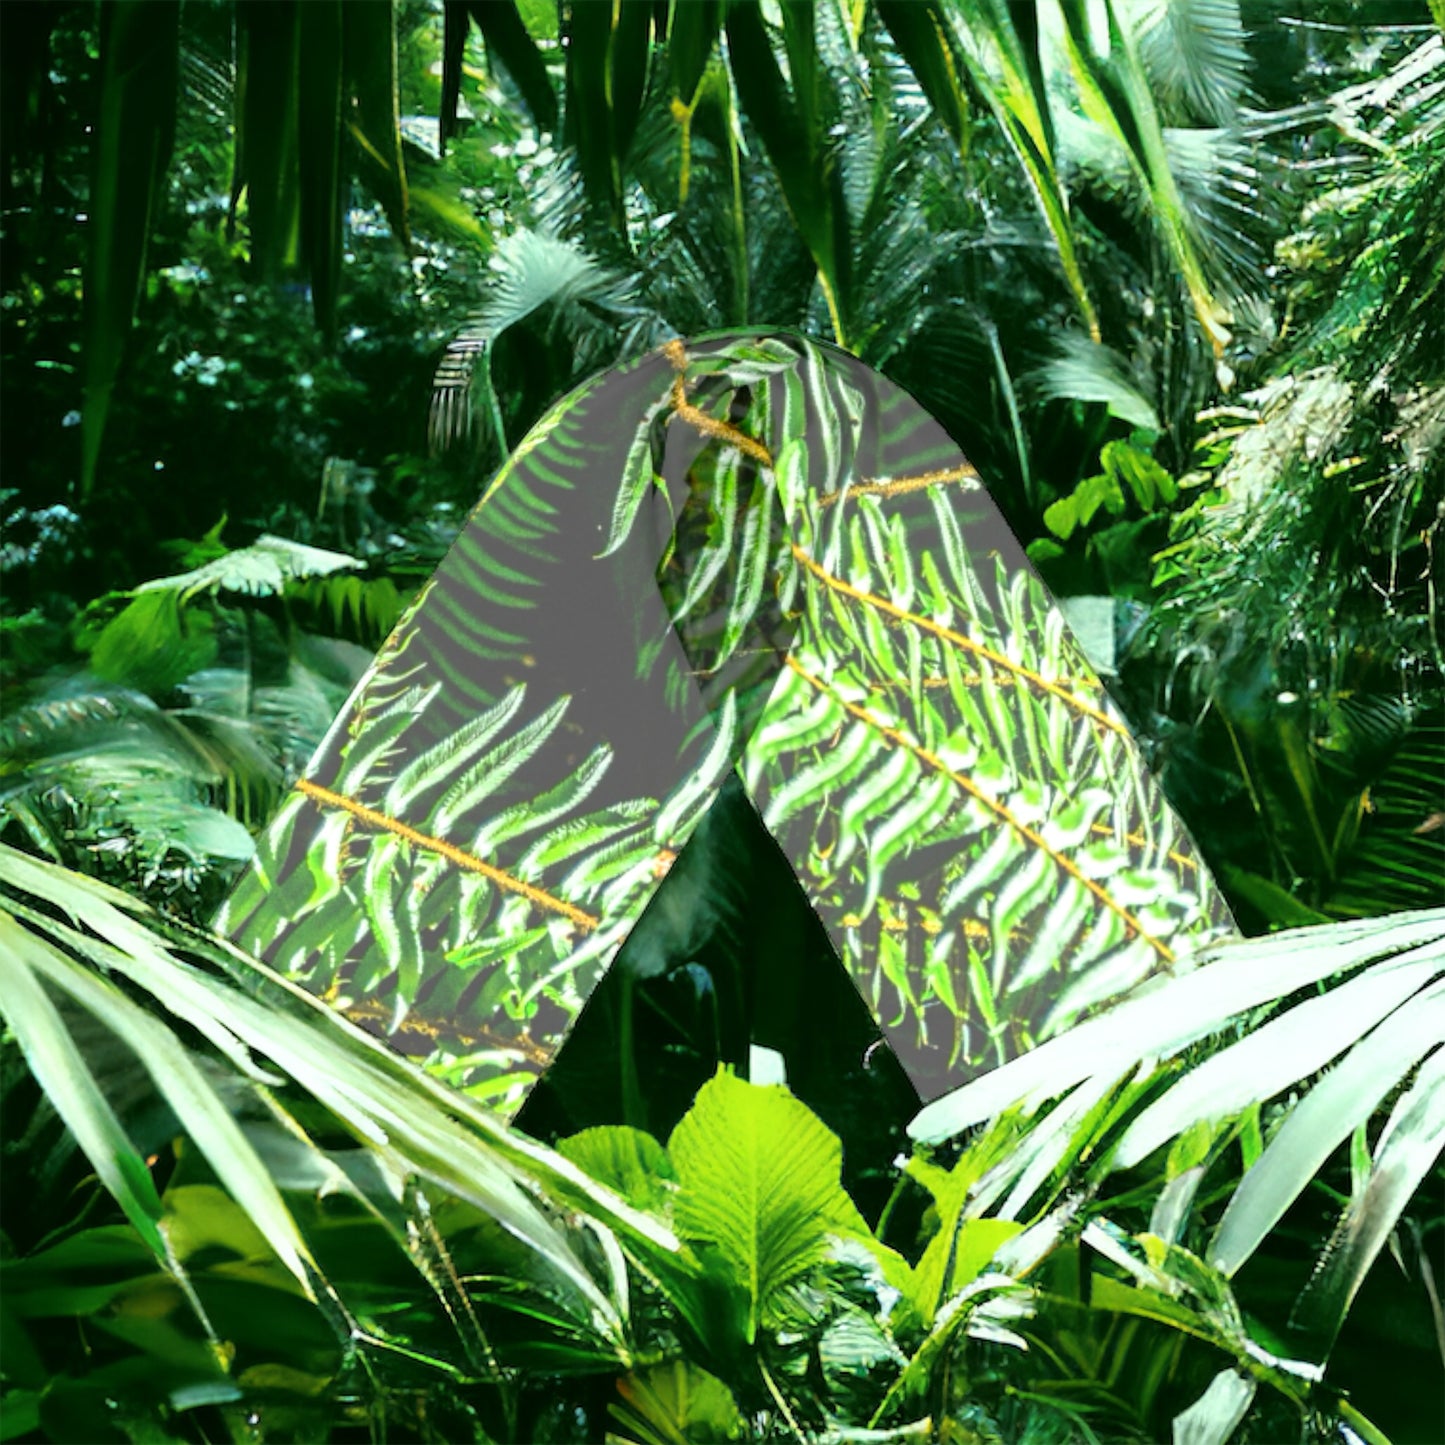 Rainforest long scarf is shown in a rainforest.